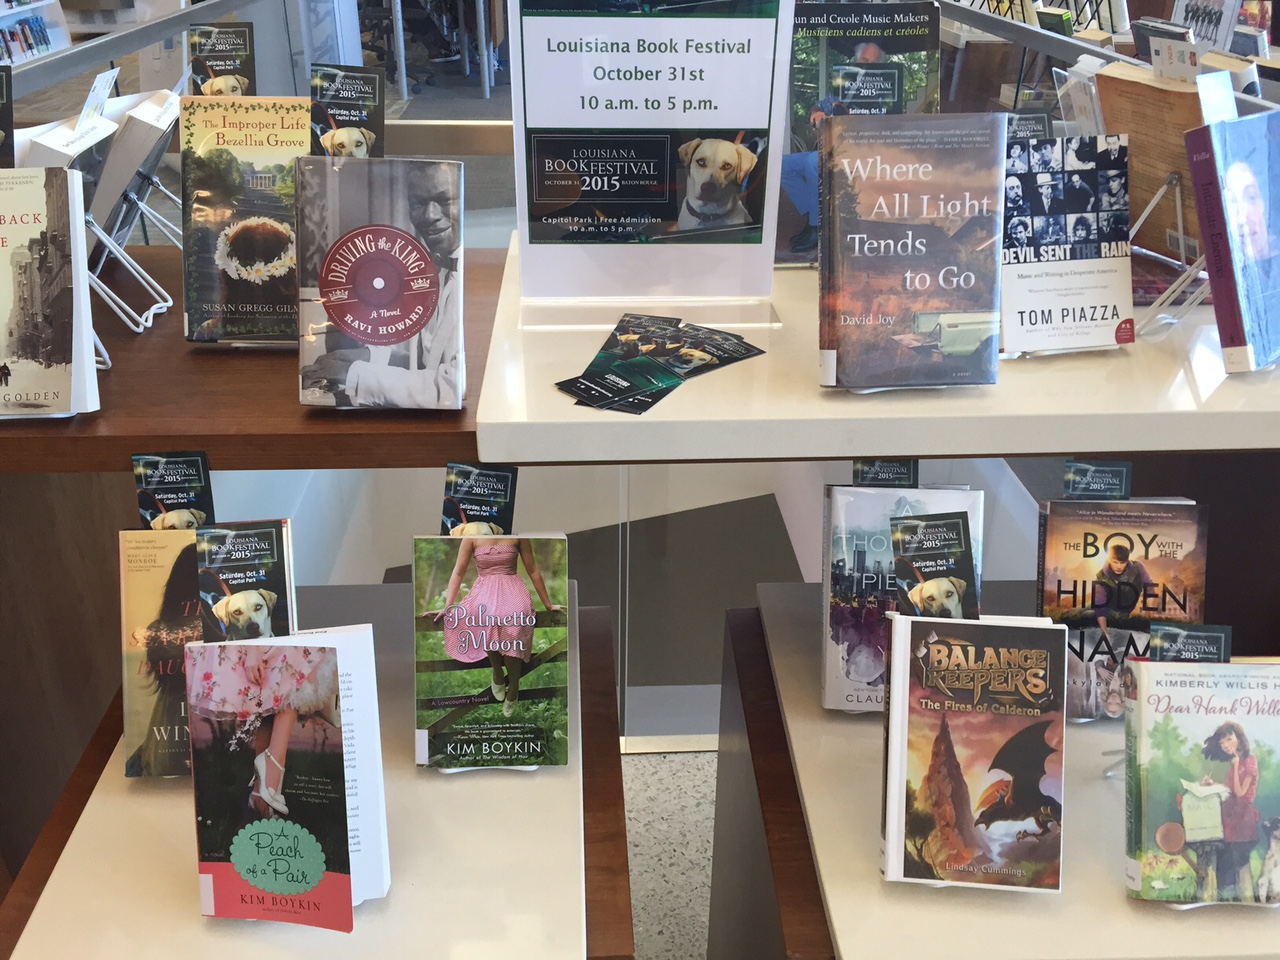 This display is located at the Main Library.